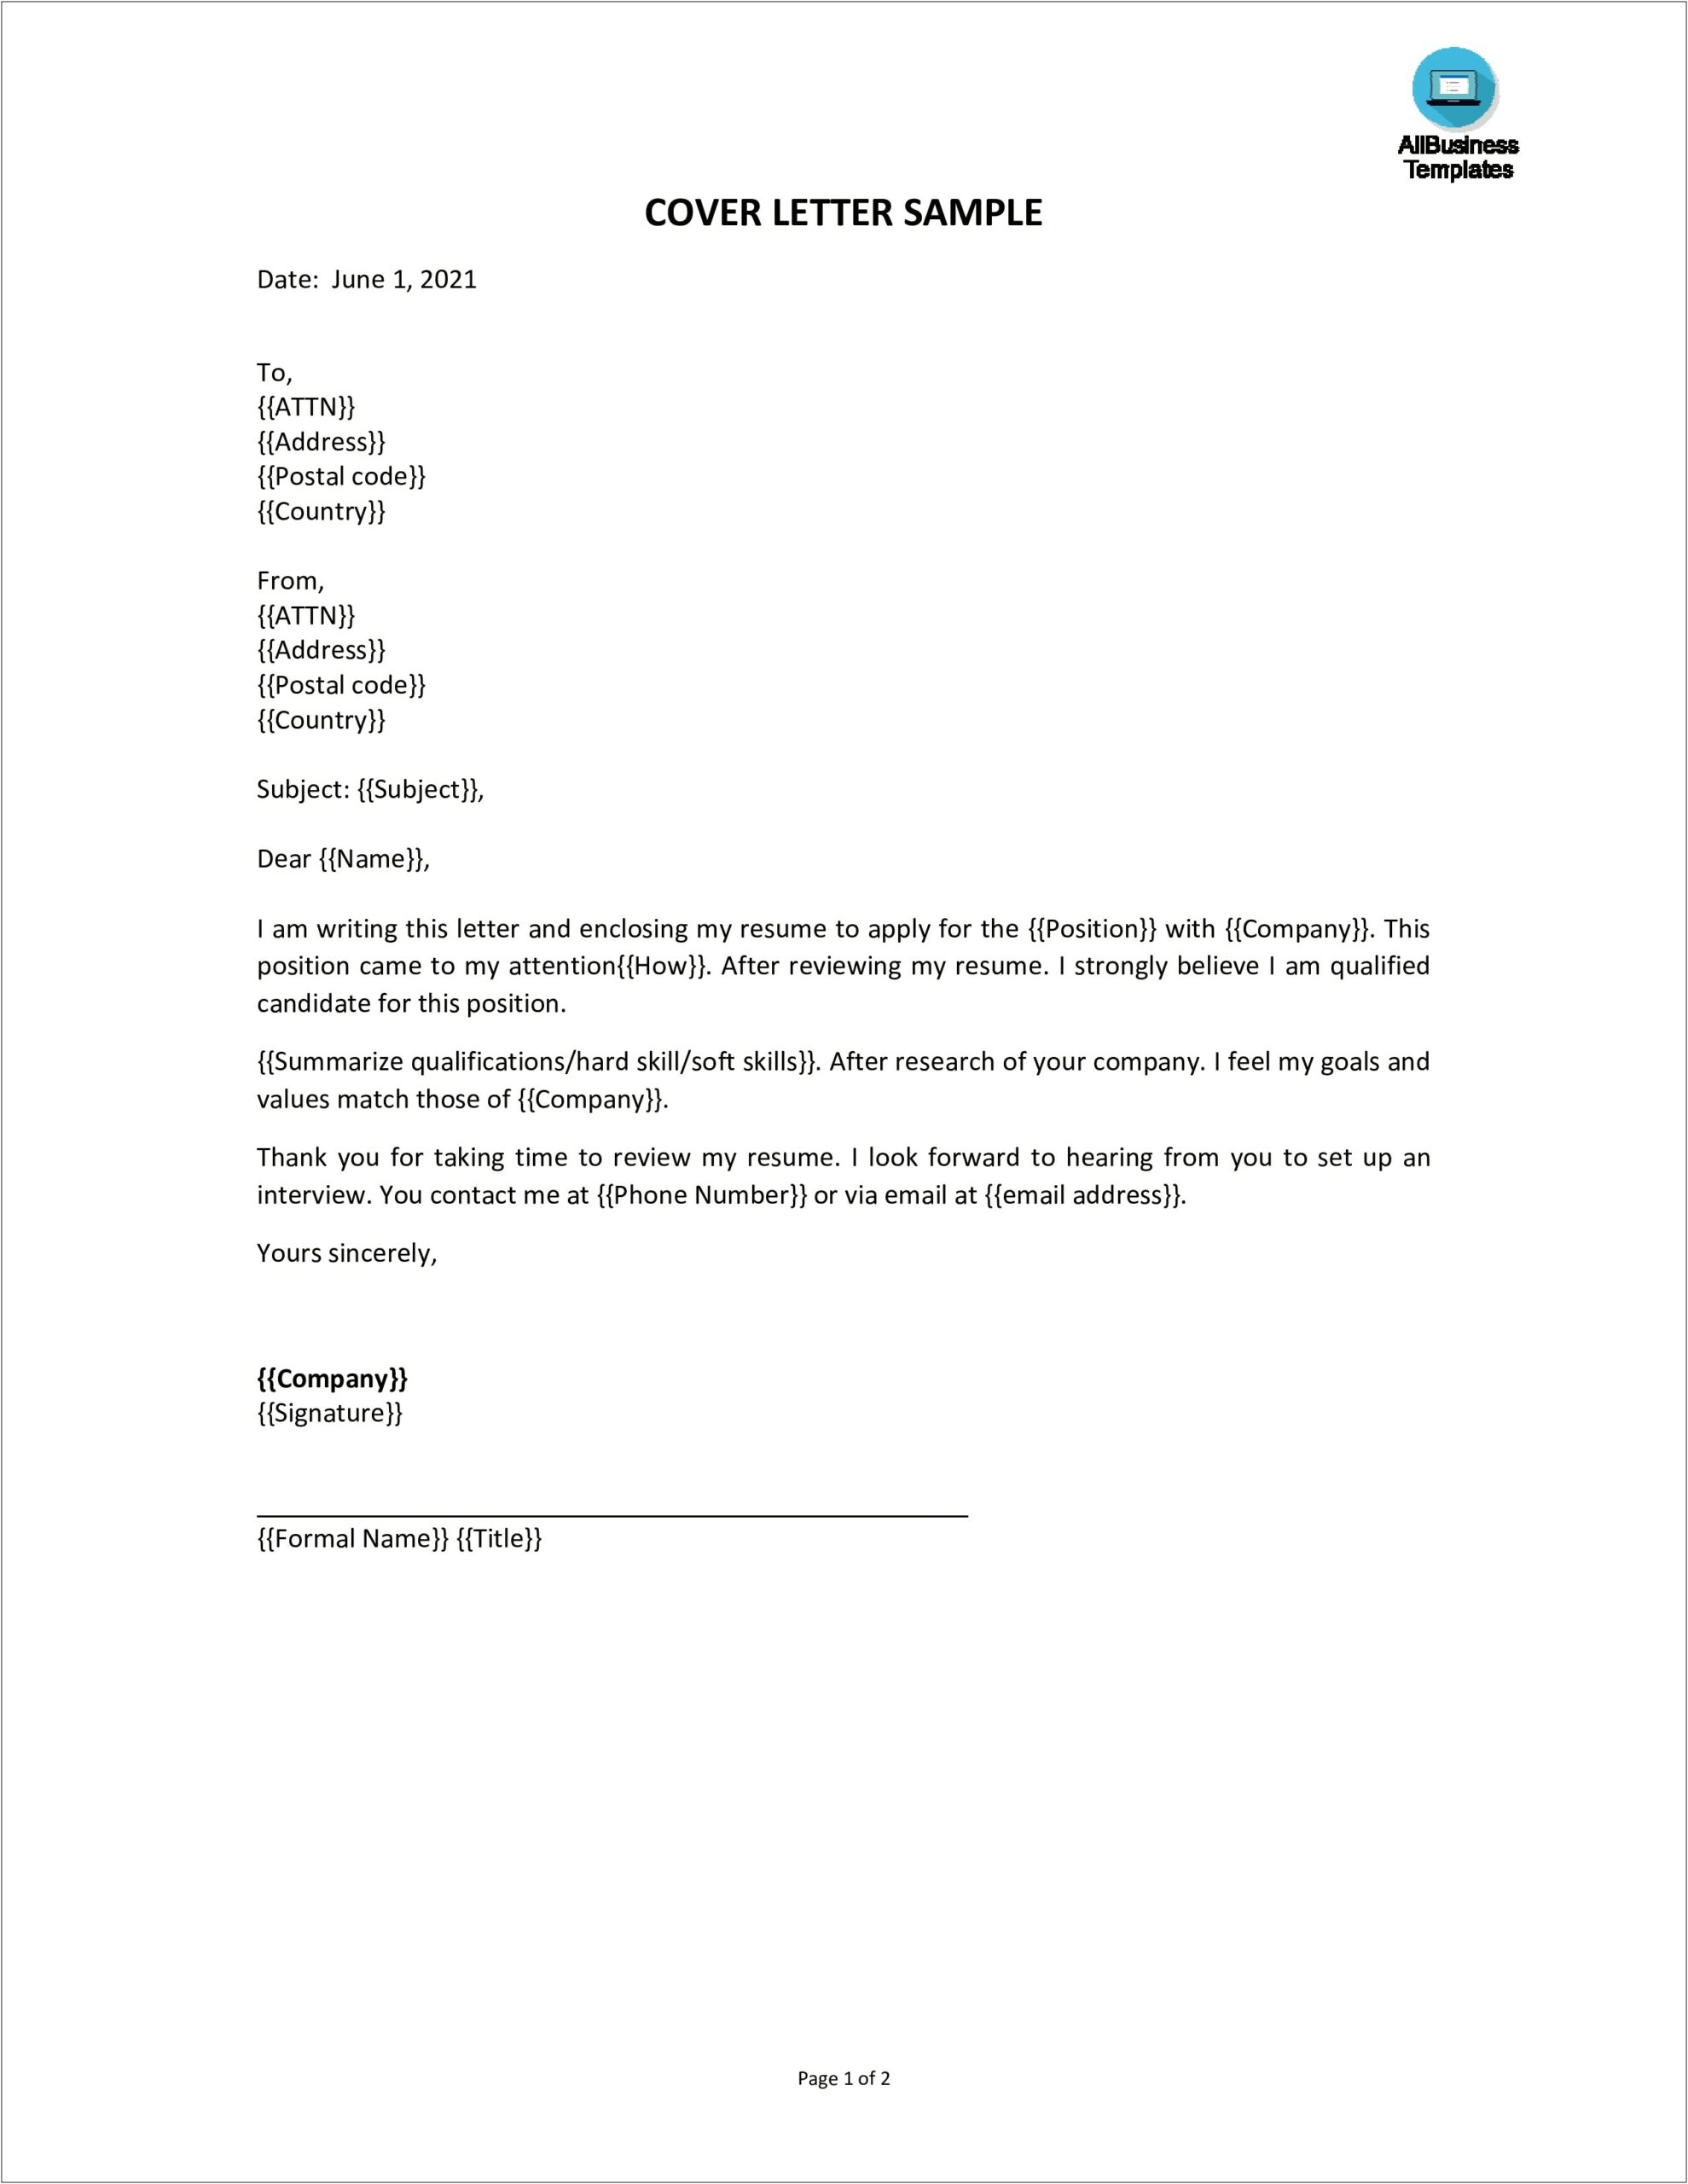 Resume And Cover Letter Format Pdf